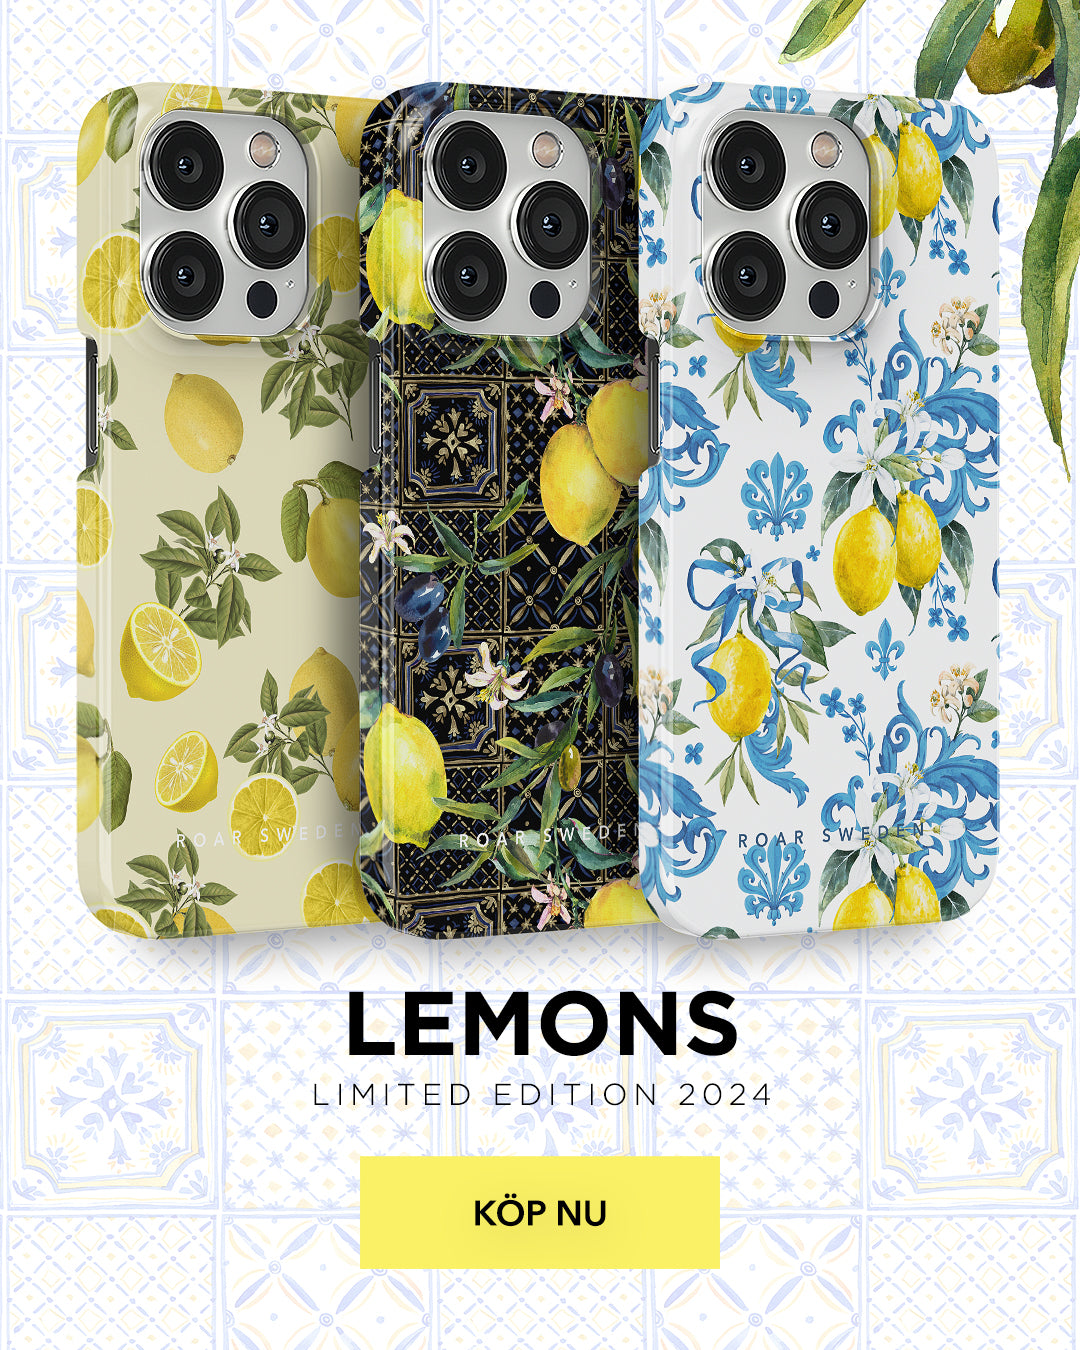 Assorted lemon-themed phone cases from the 'limited edition 2024' collection.